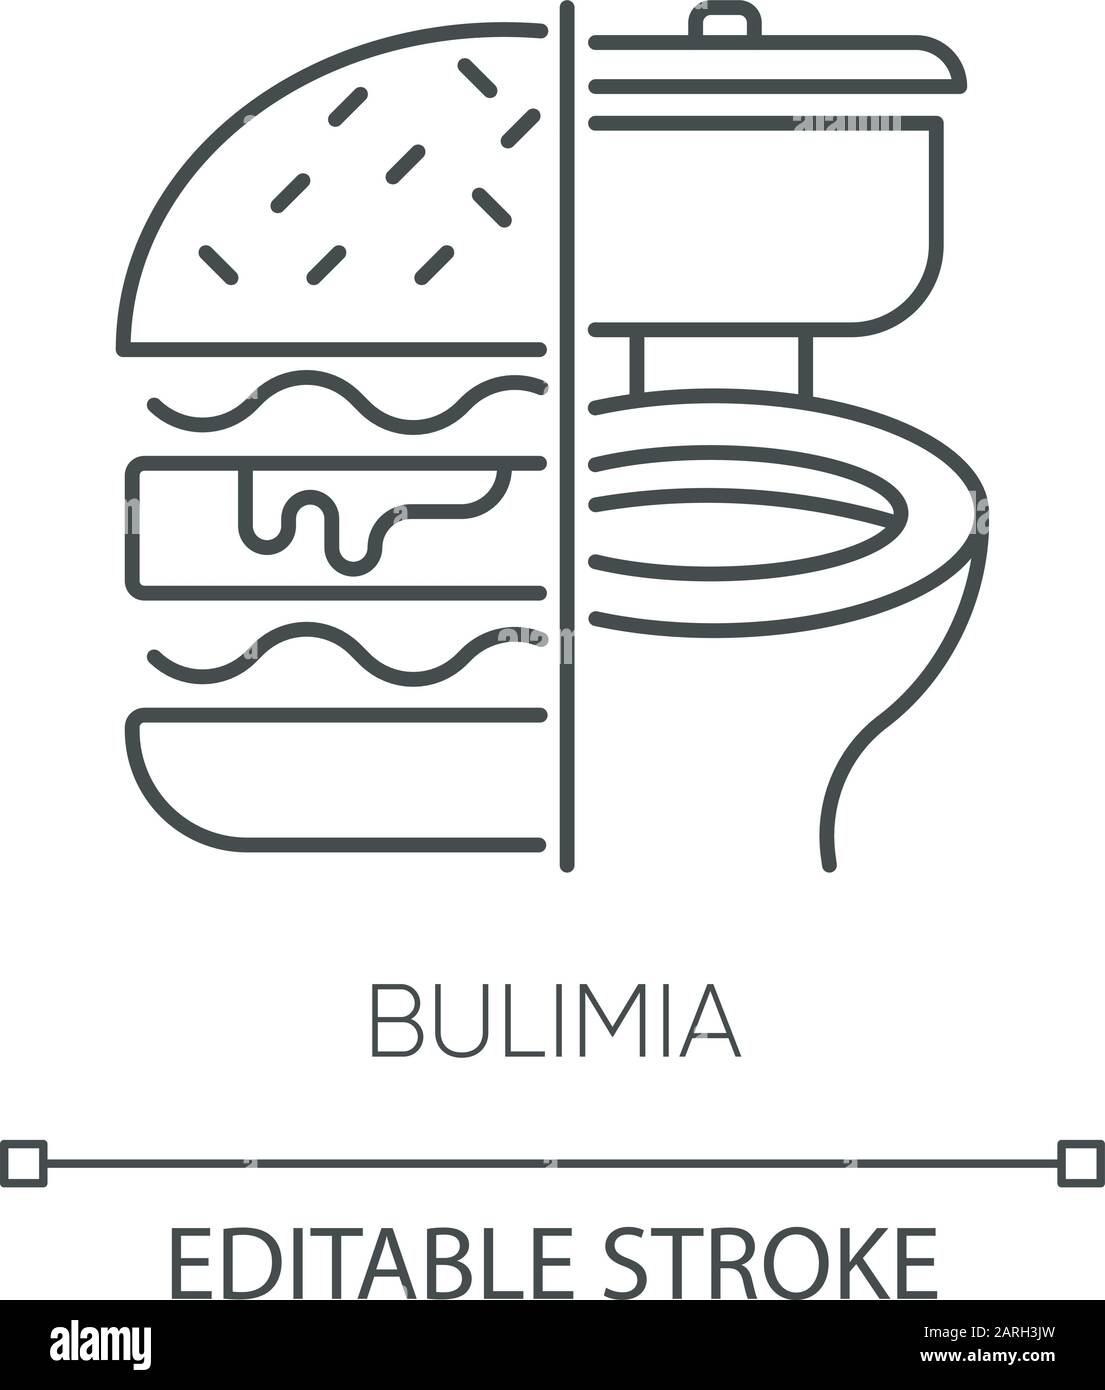 Bulimia linear icon. Eating disorder. Unhealthy hunger. Binge eating from stress. Mental disorder. Thin line illustration. Contour symbol. Vector isol Stock Vector